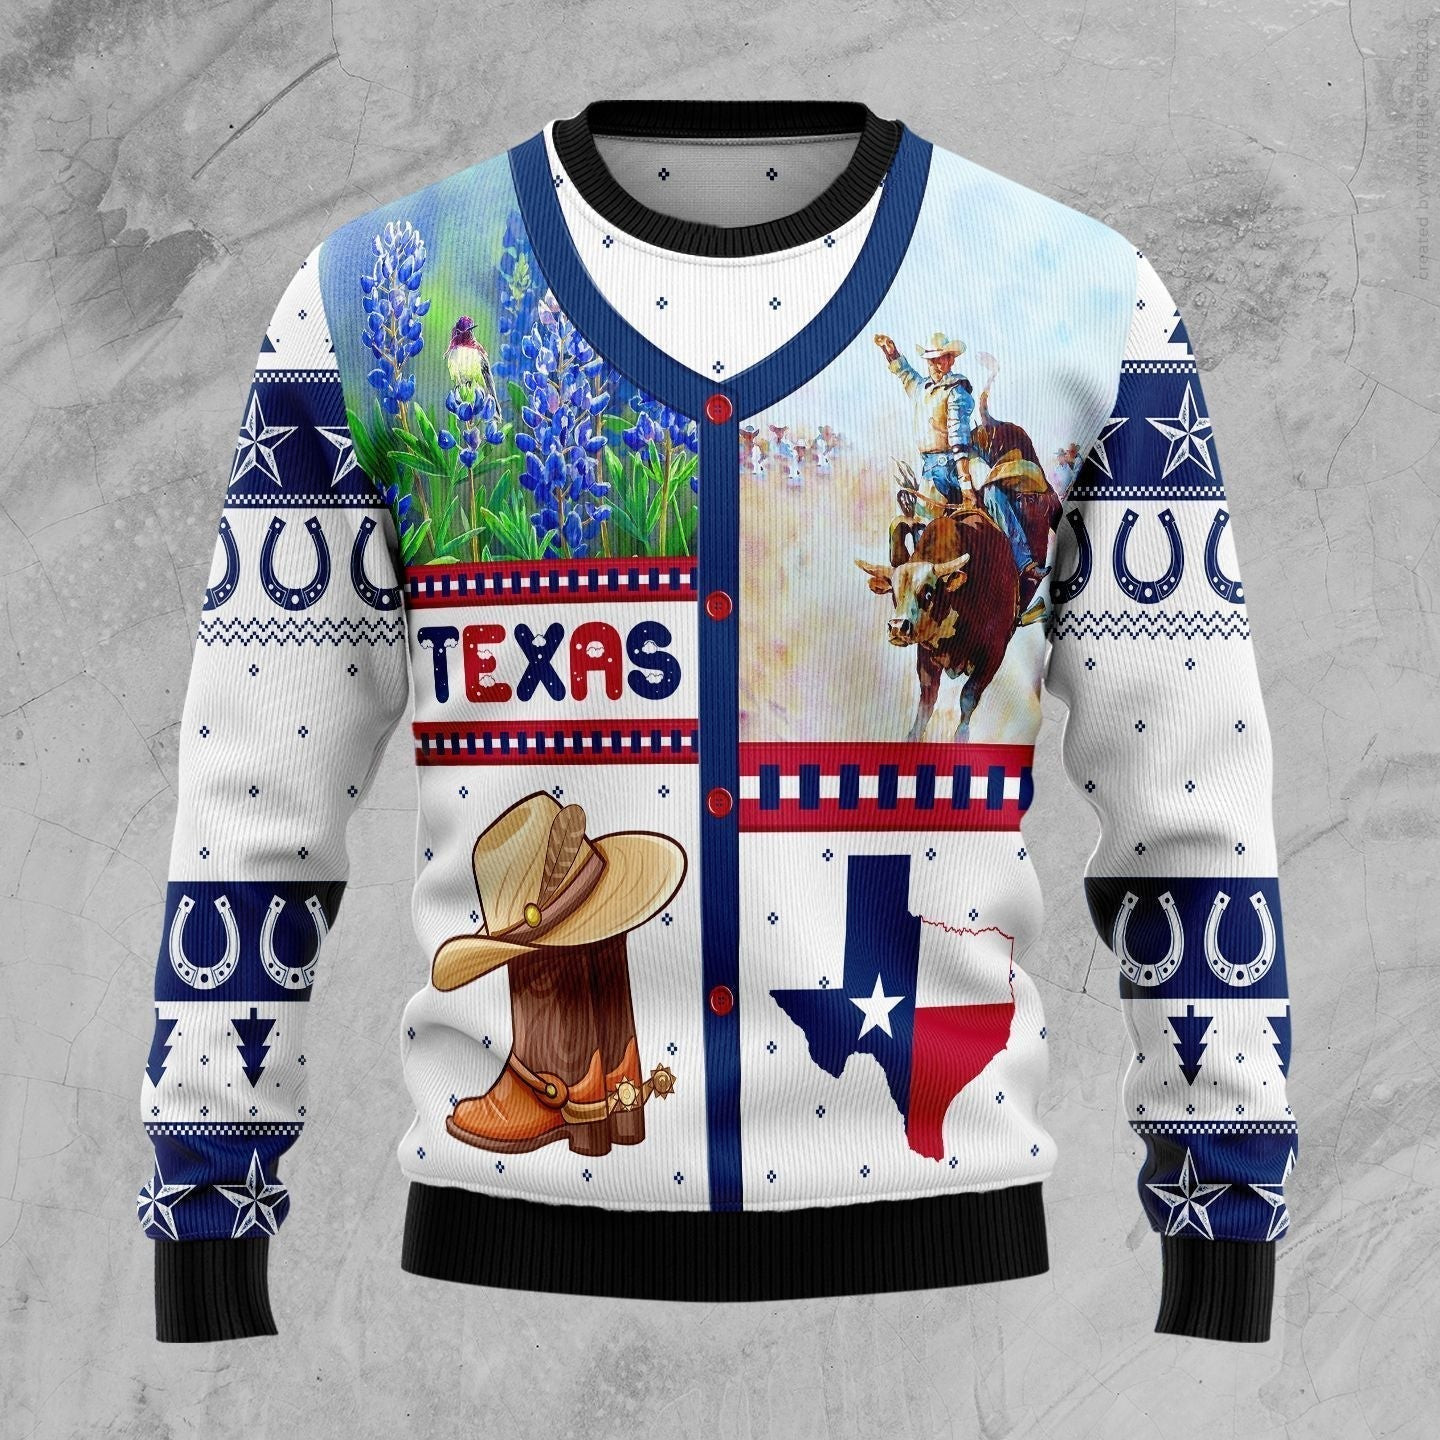 Awesome Texas Ugly Christmas Sweater Ugly Sweater For Men Women, Holiday Sweater